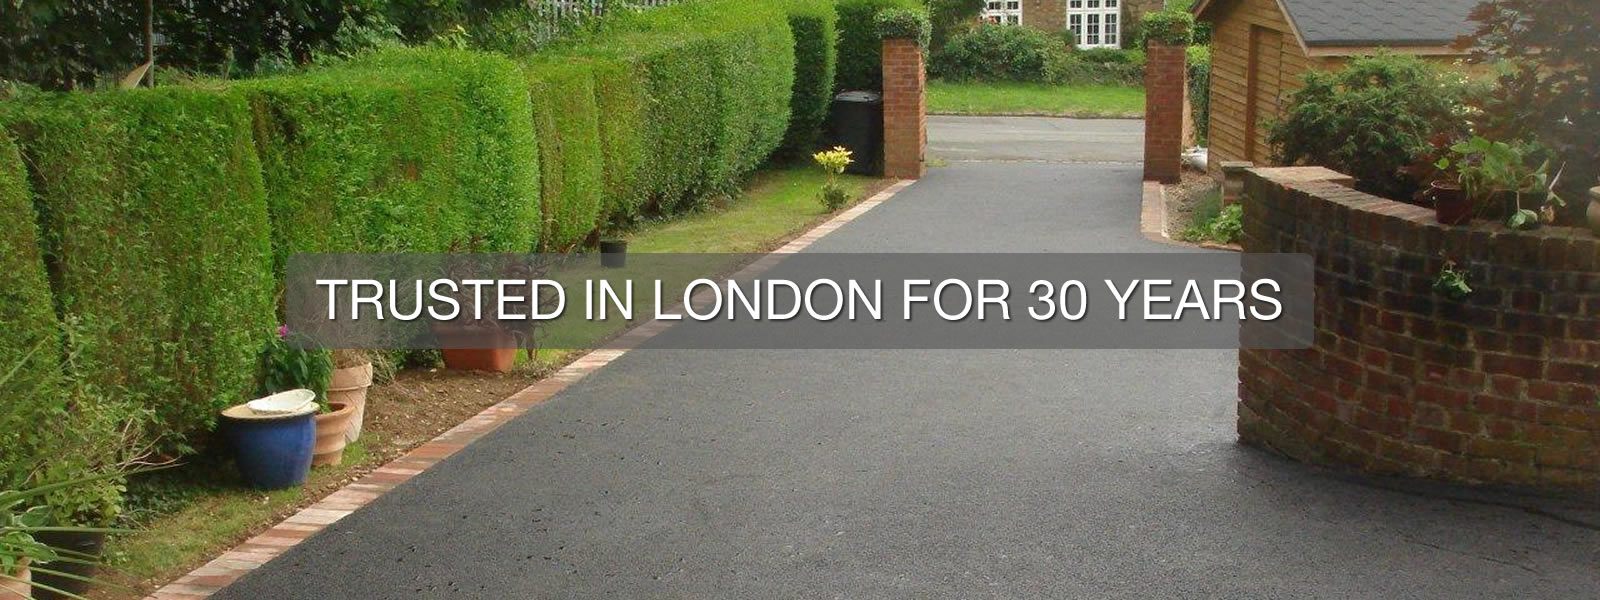 Glenco Driveways - Trusted in London for 30 years